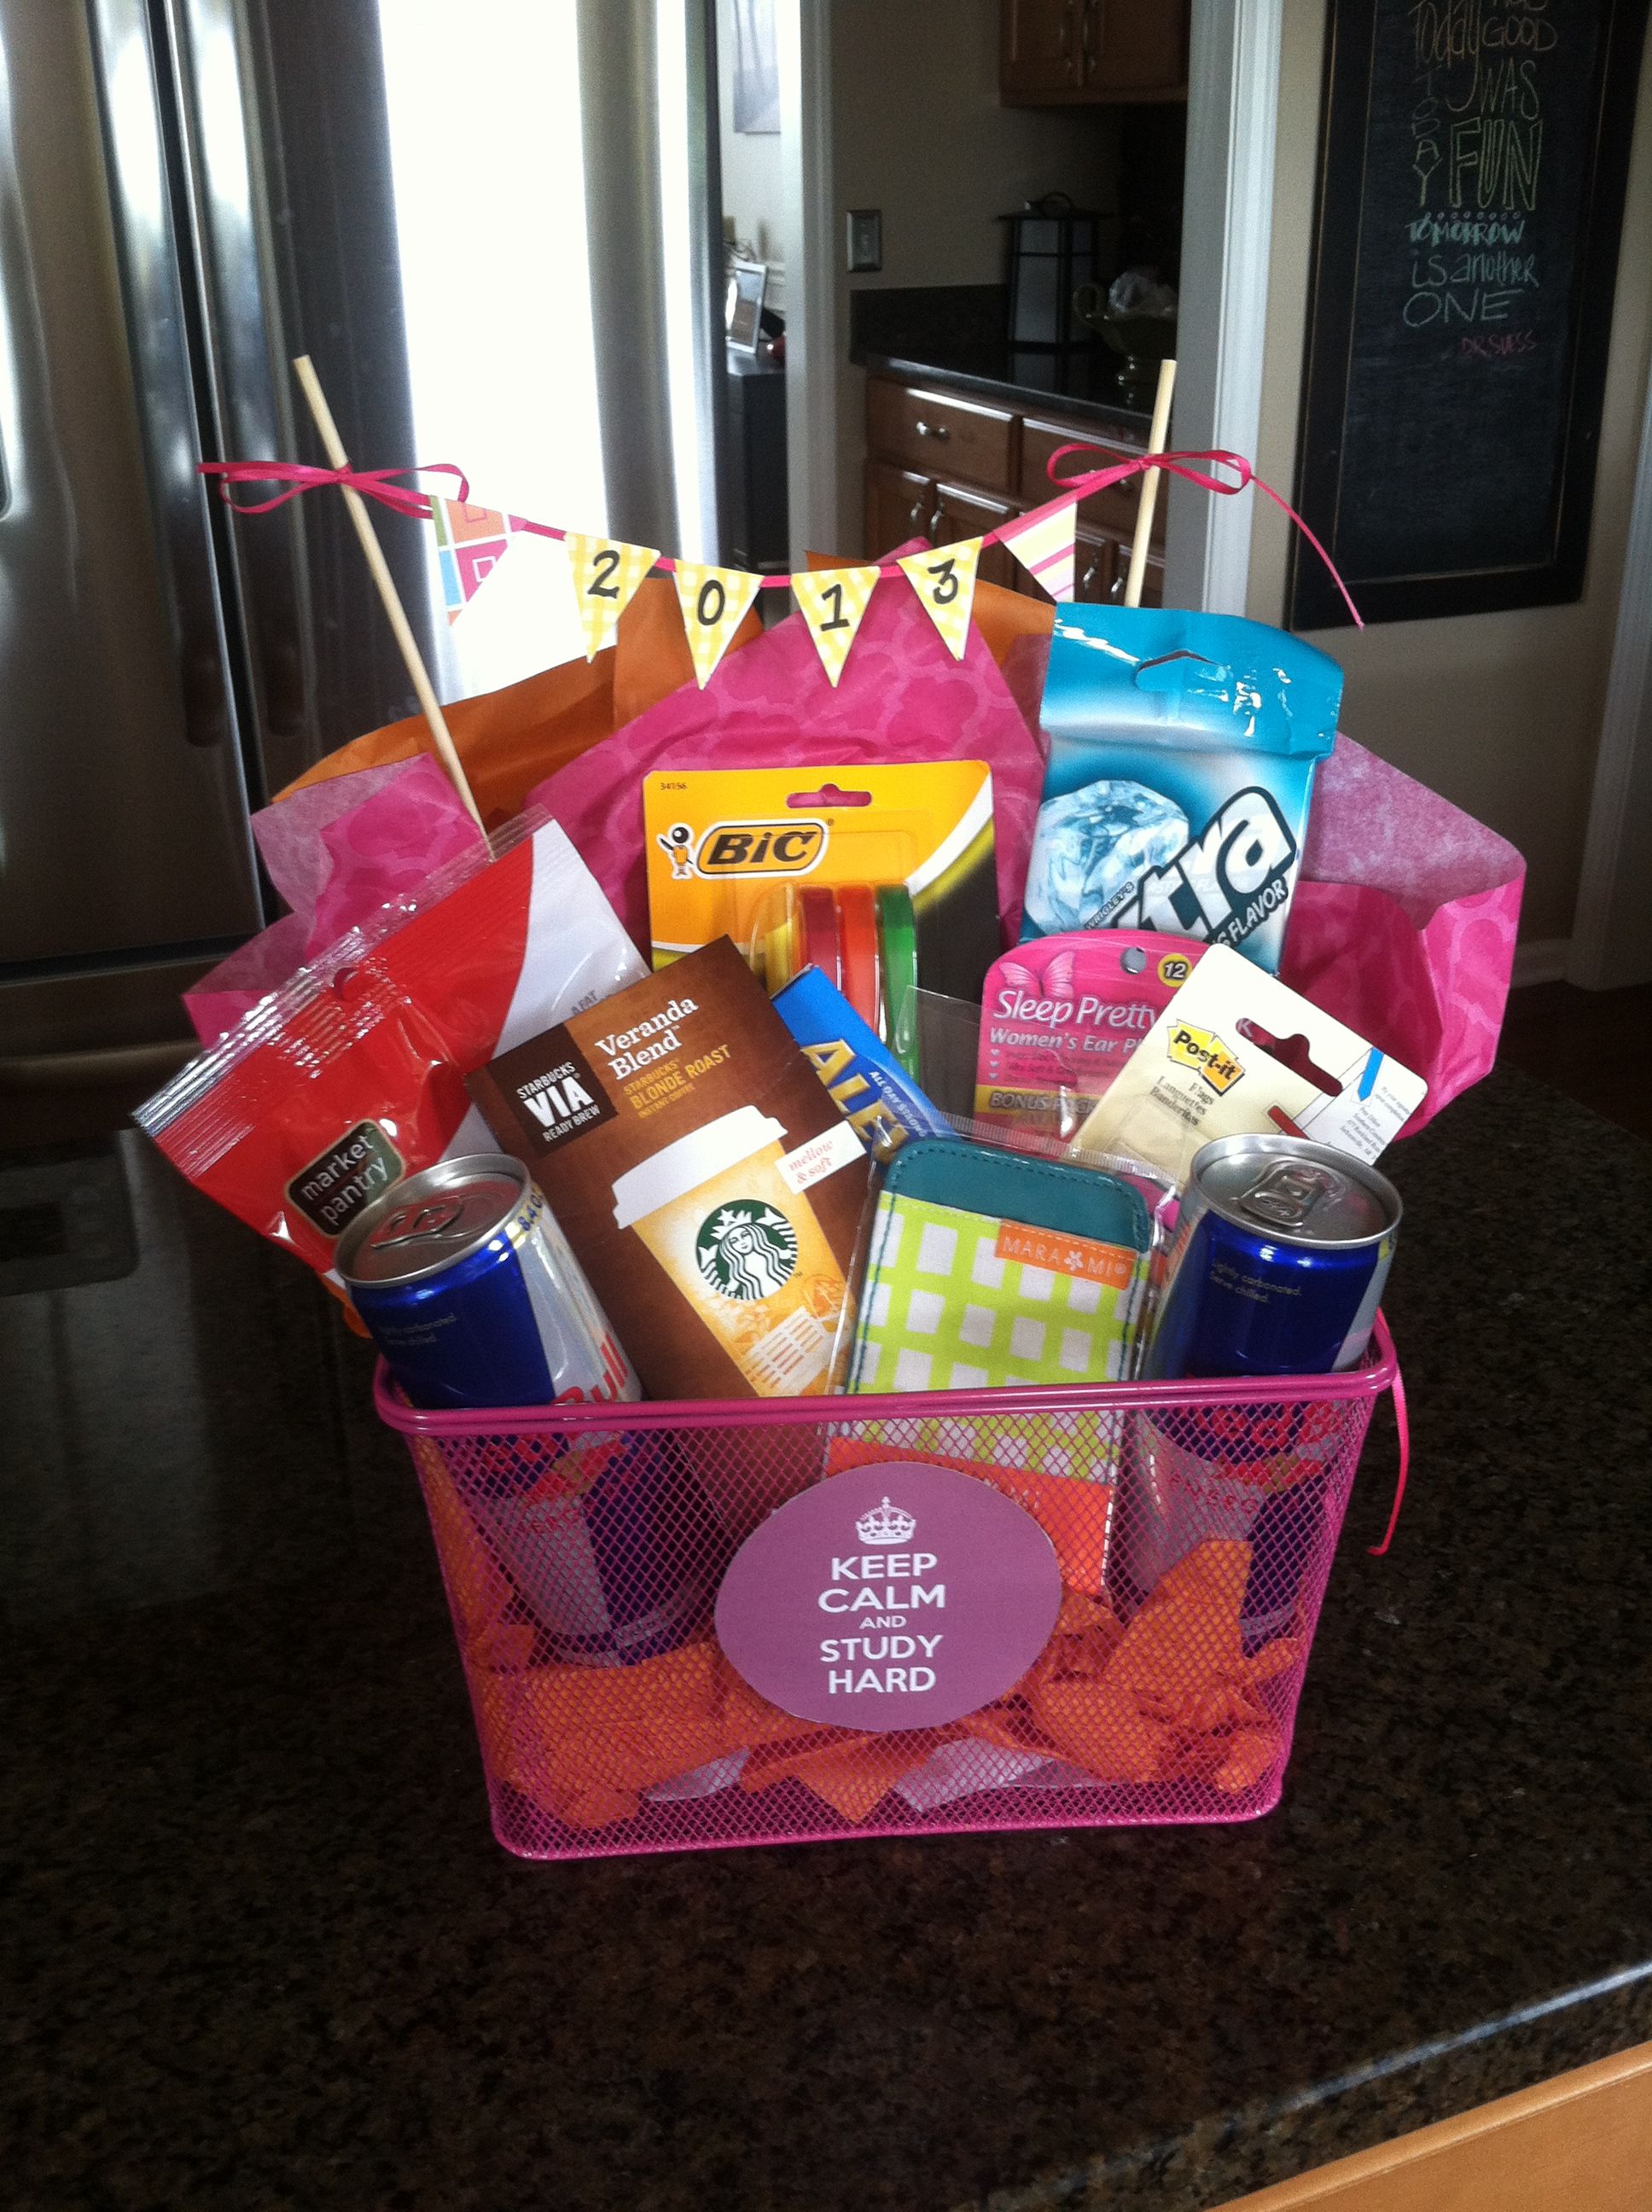 To sew | College gifts, College gift baskets